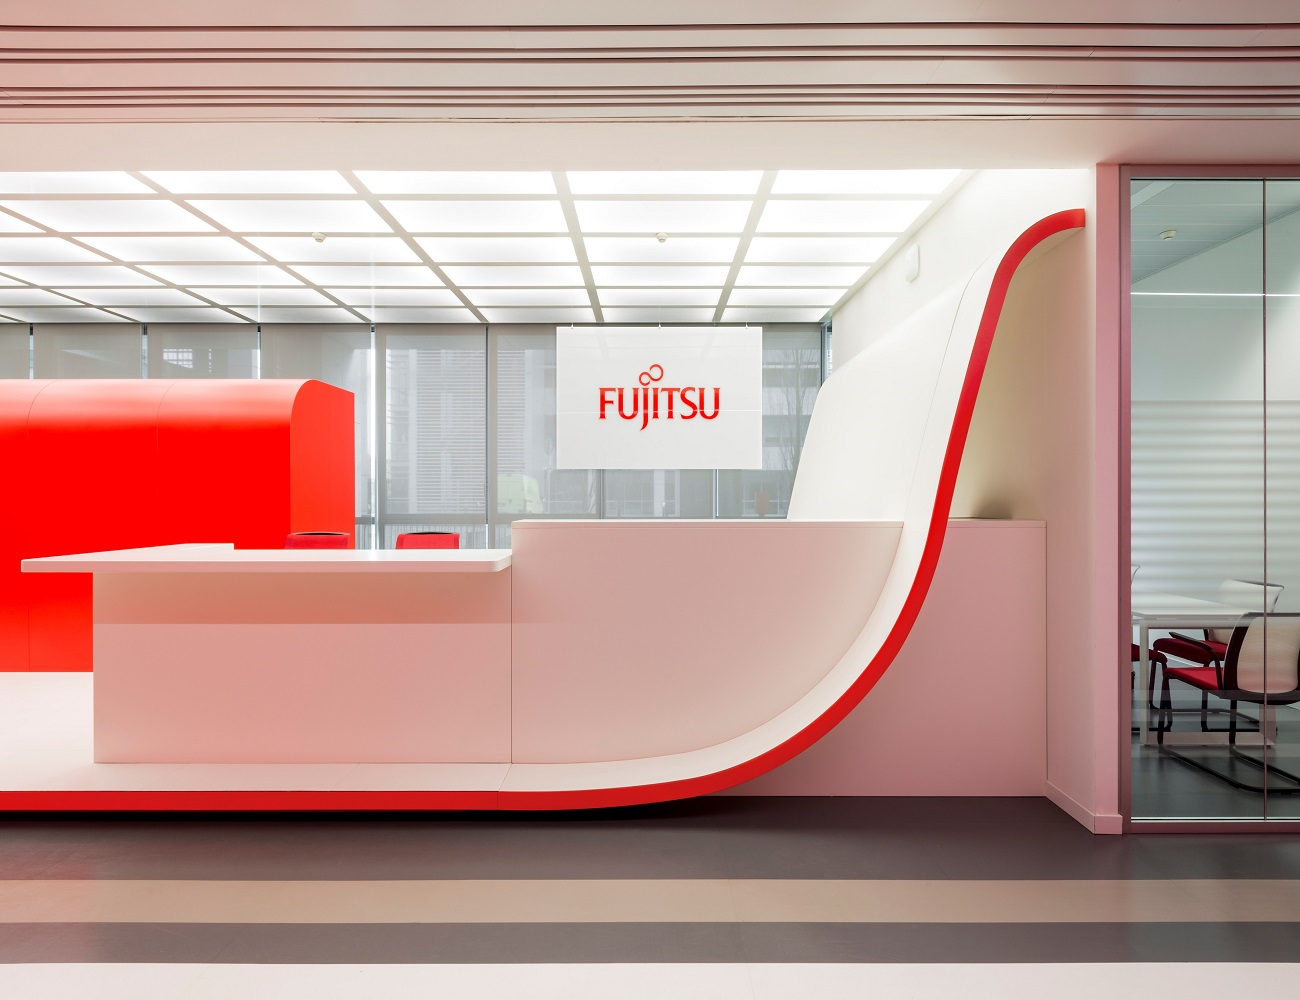 Bugs in Fujitsu accounting software that led to false convictions were known from the start